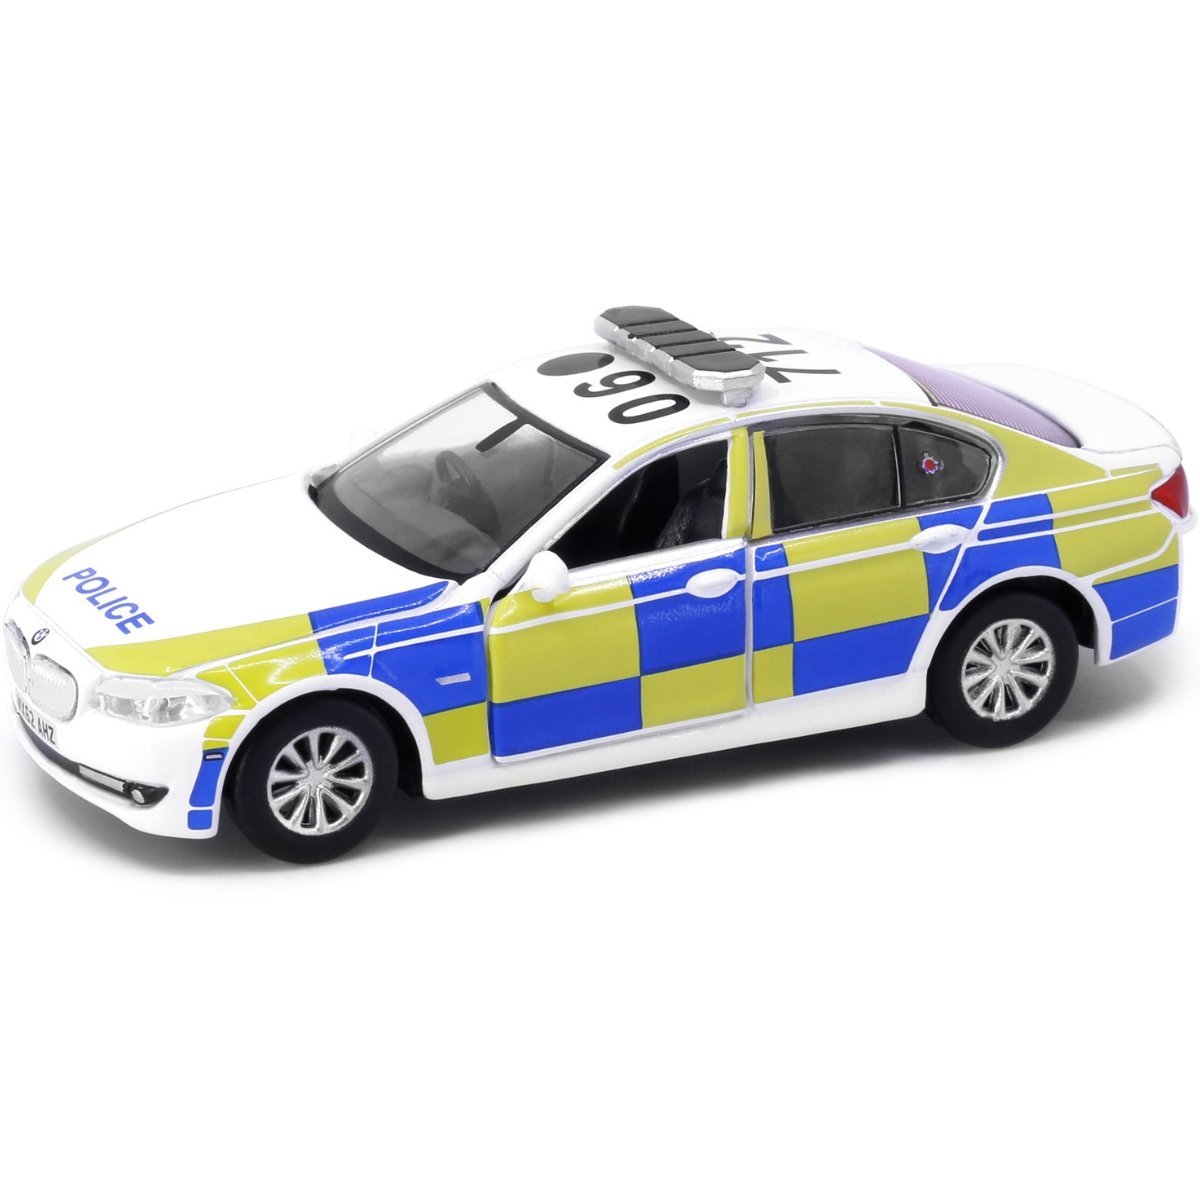 Tiny Models UK7 BMW 5 Series F10 - Greater Manchester Police (1:64 Scale) - Phillips Hobbies